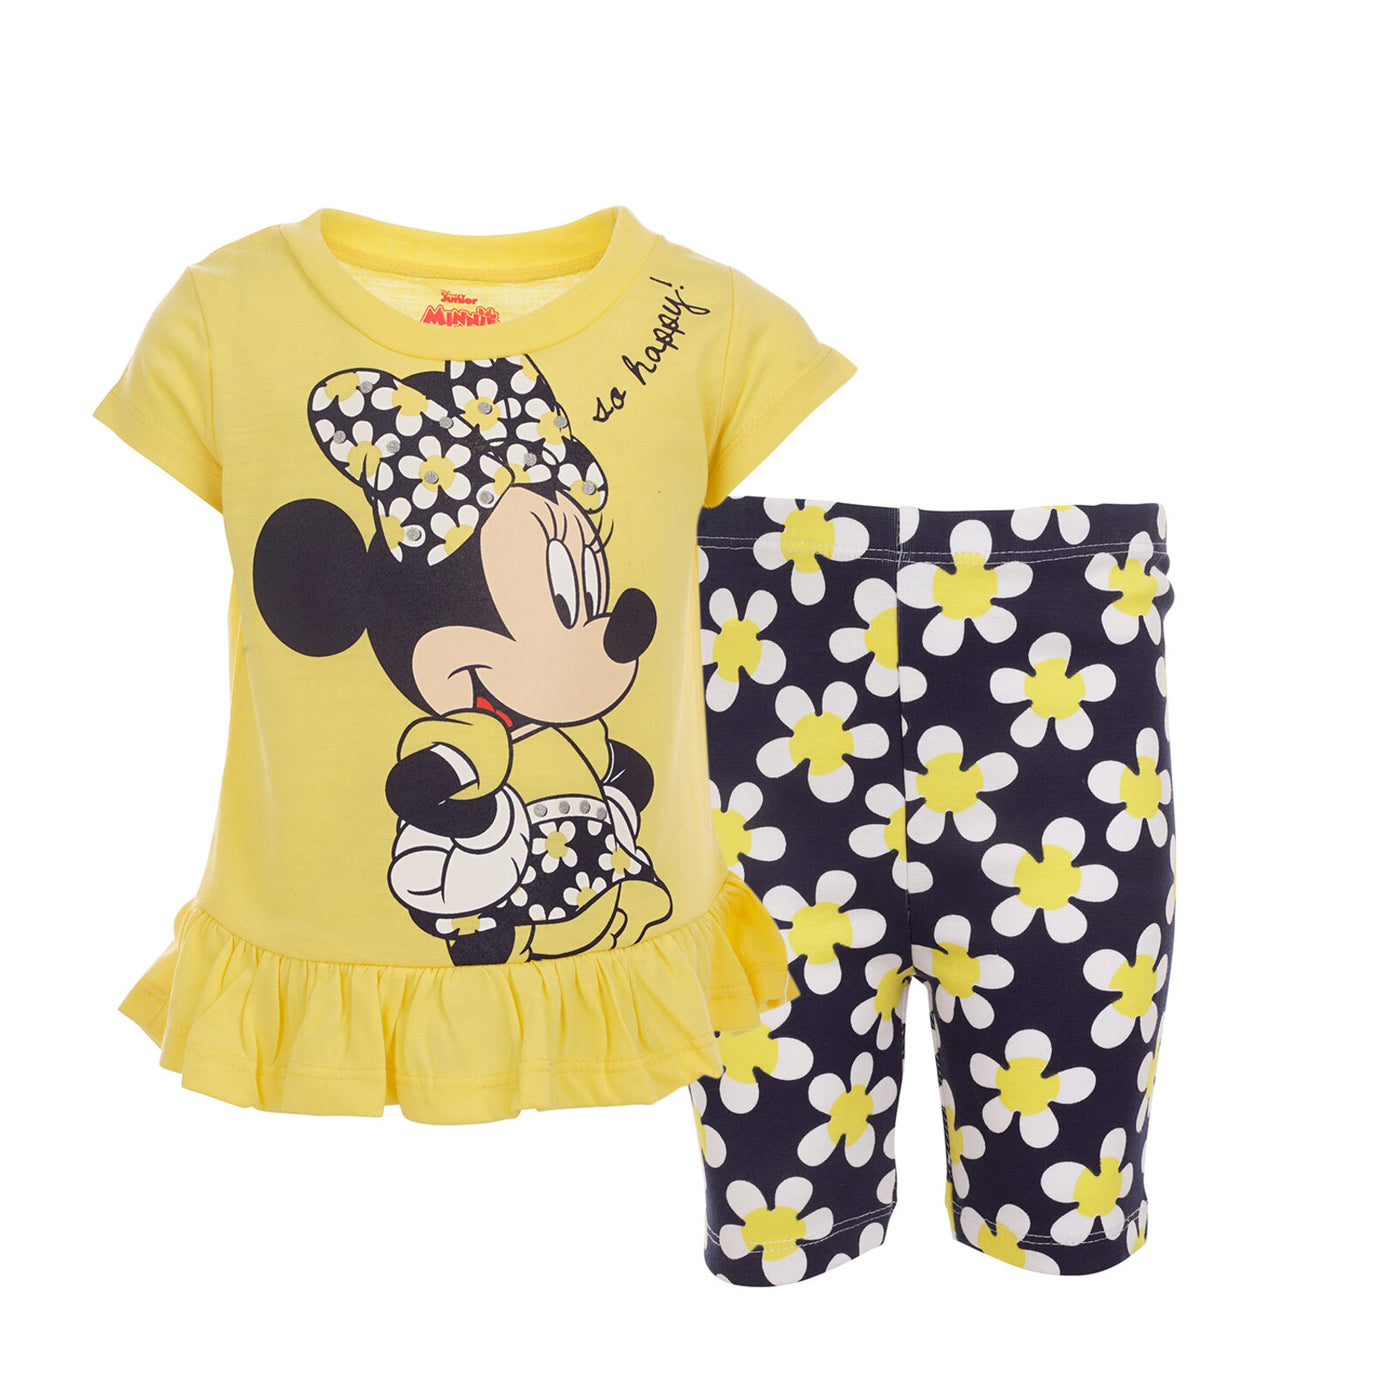 Minnie Mouse Peplum T-Shirt and Bike Shorts Outfit Set